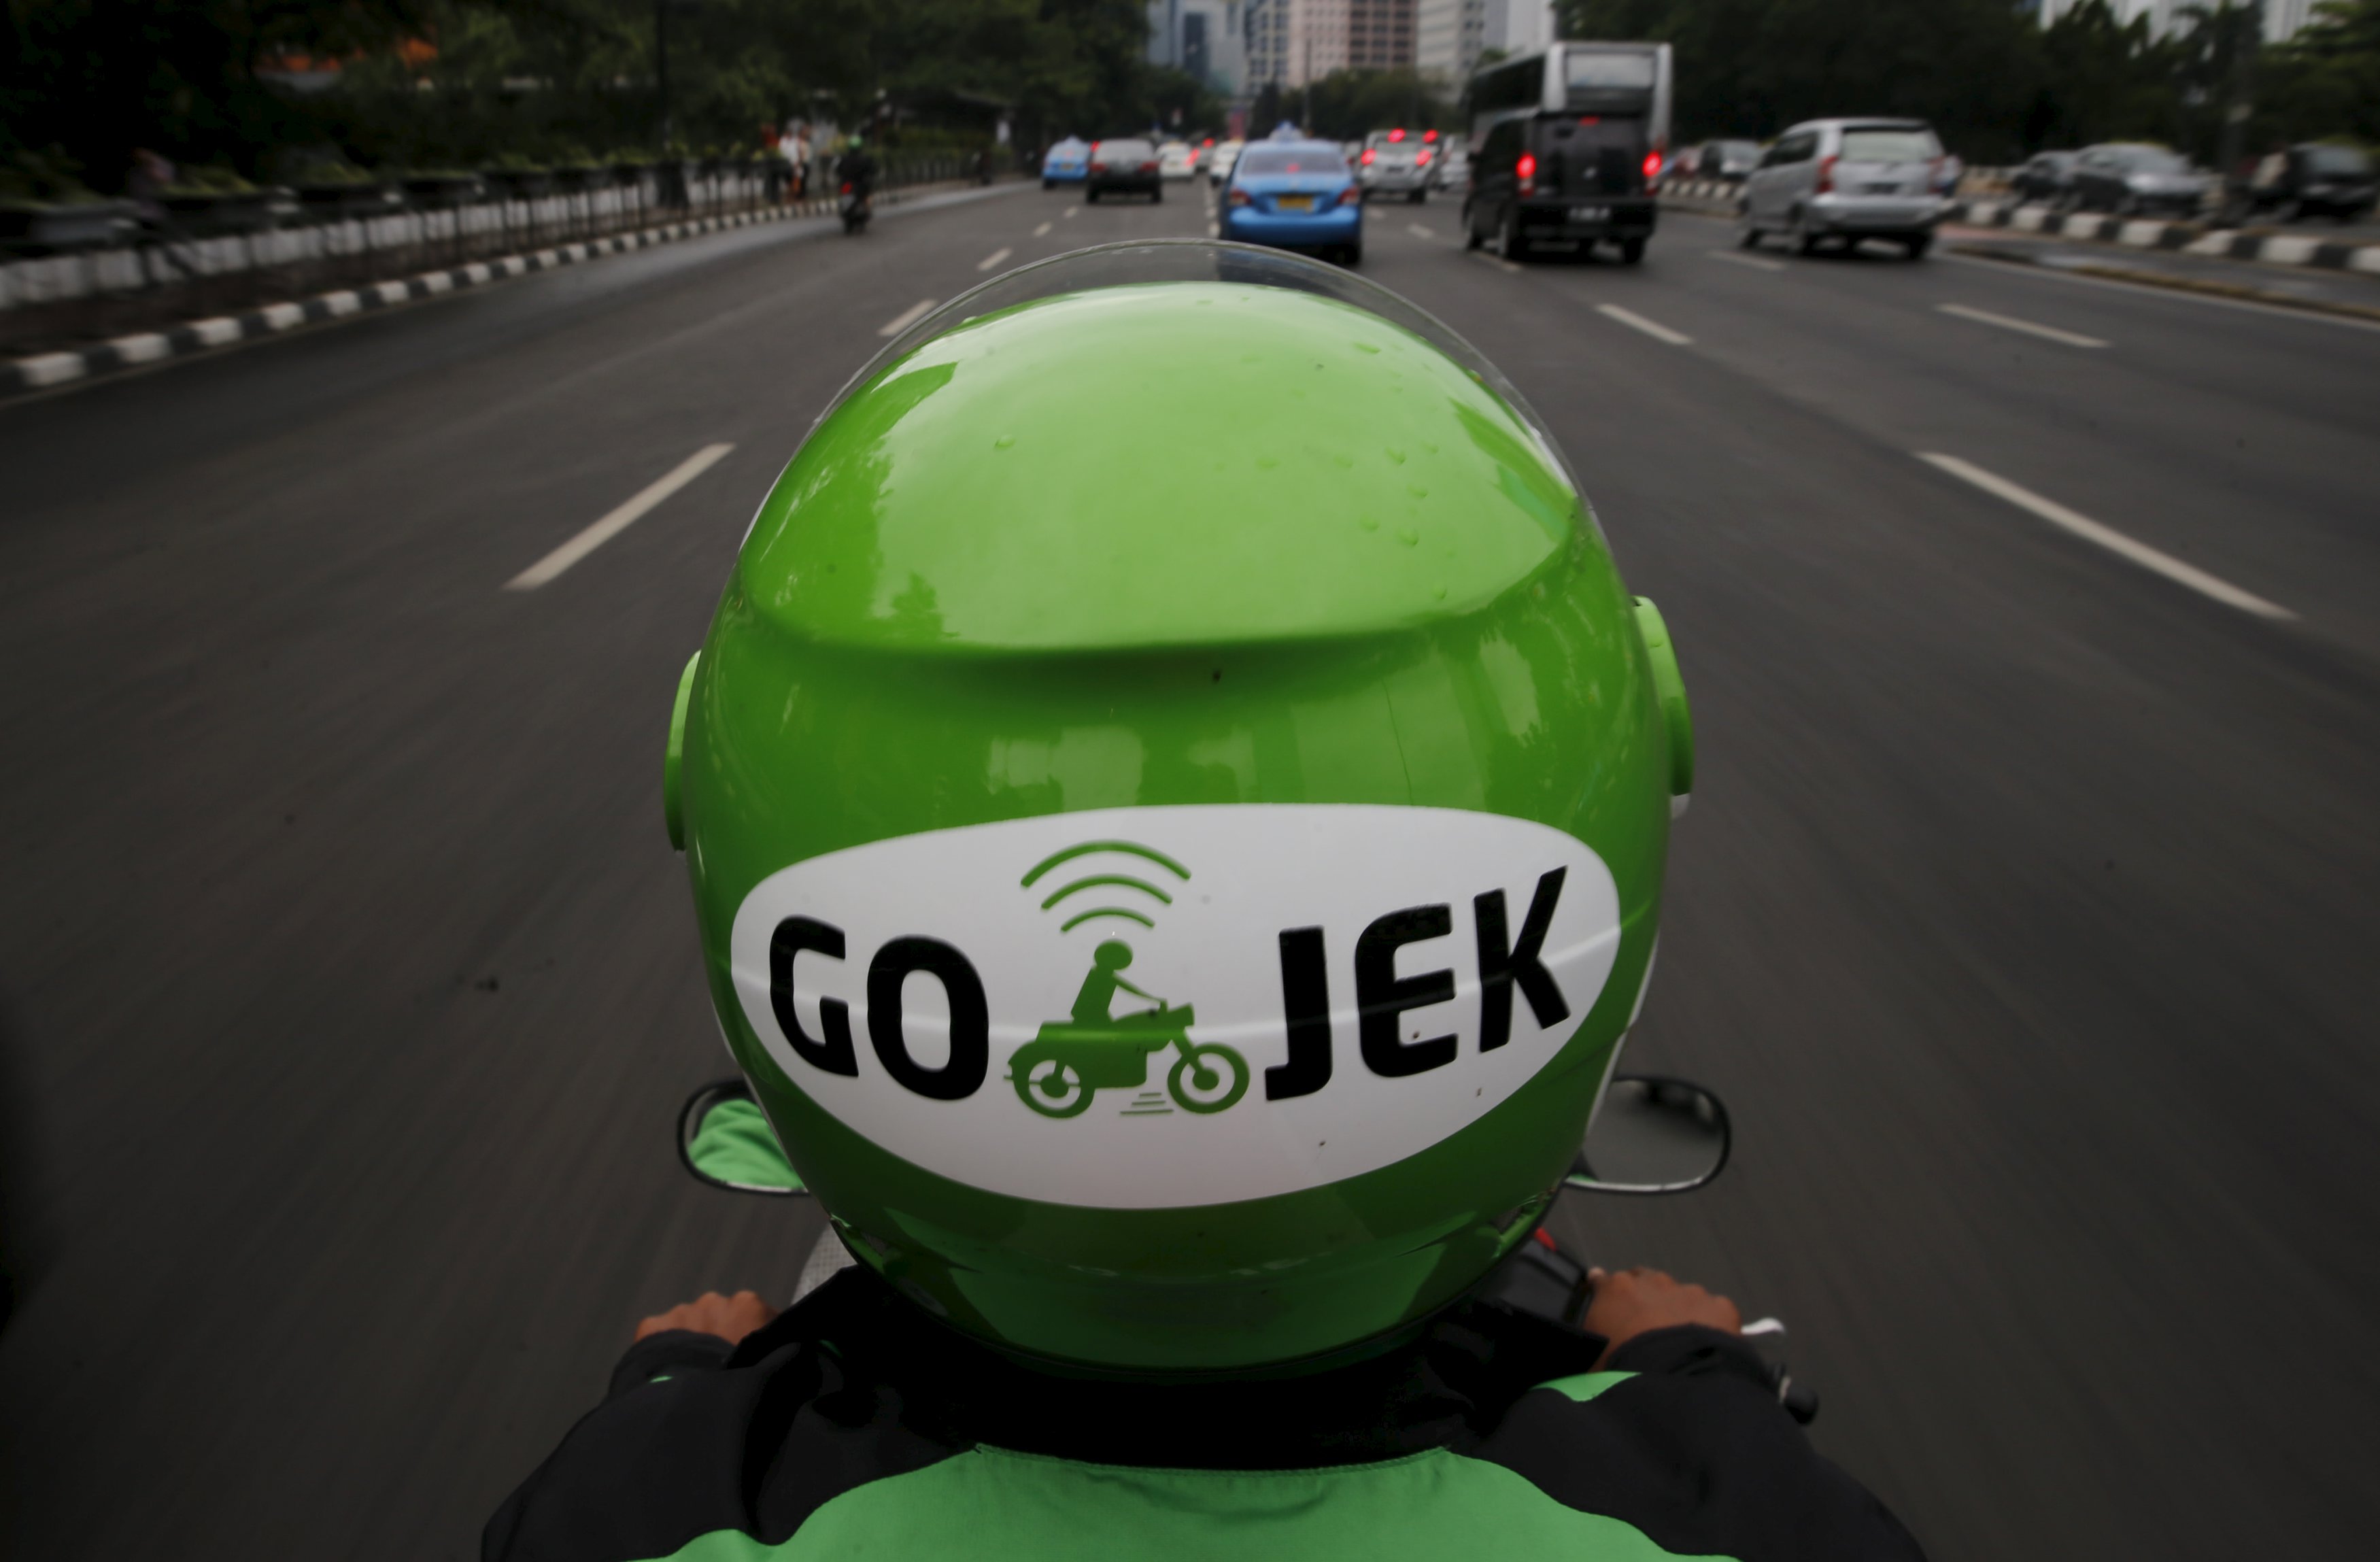 Gojek’s courier strike ends today. What will happen next?